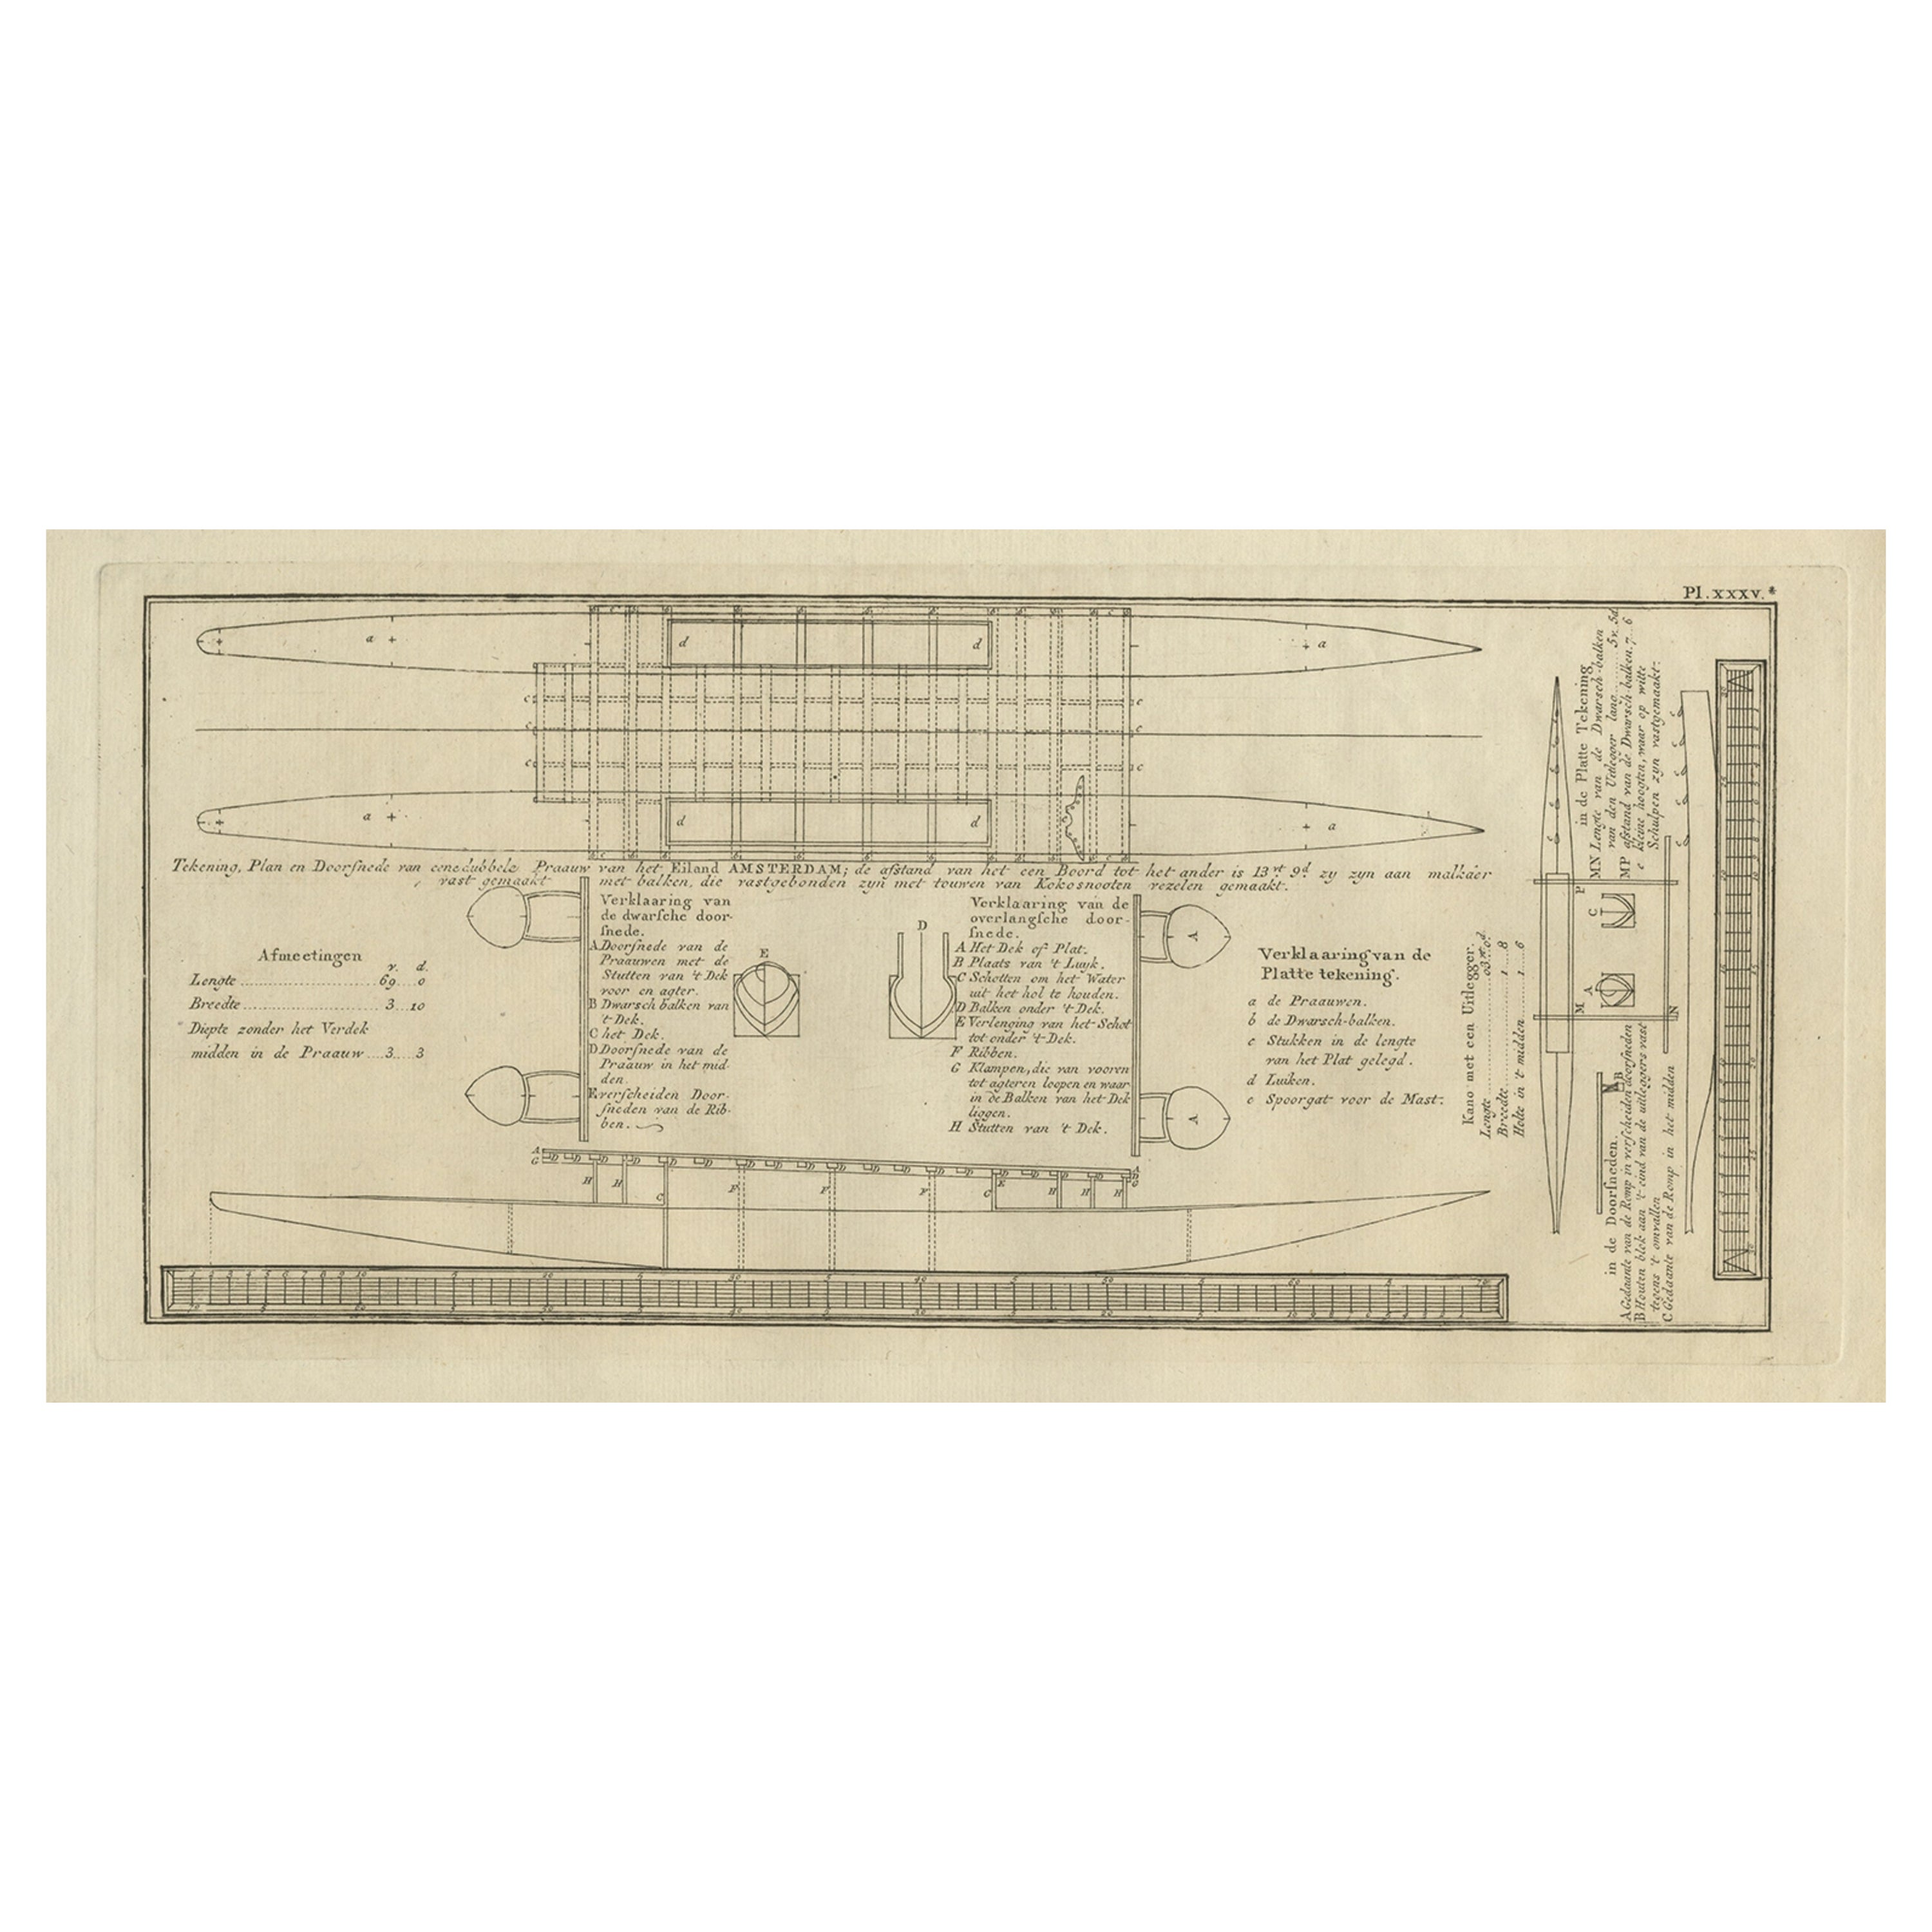 Old Drawing or Plan of a Proa of Amsterdam Island, Now Tongatapu, Tonga, 1803 For Sale